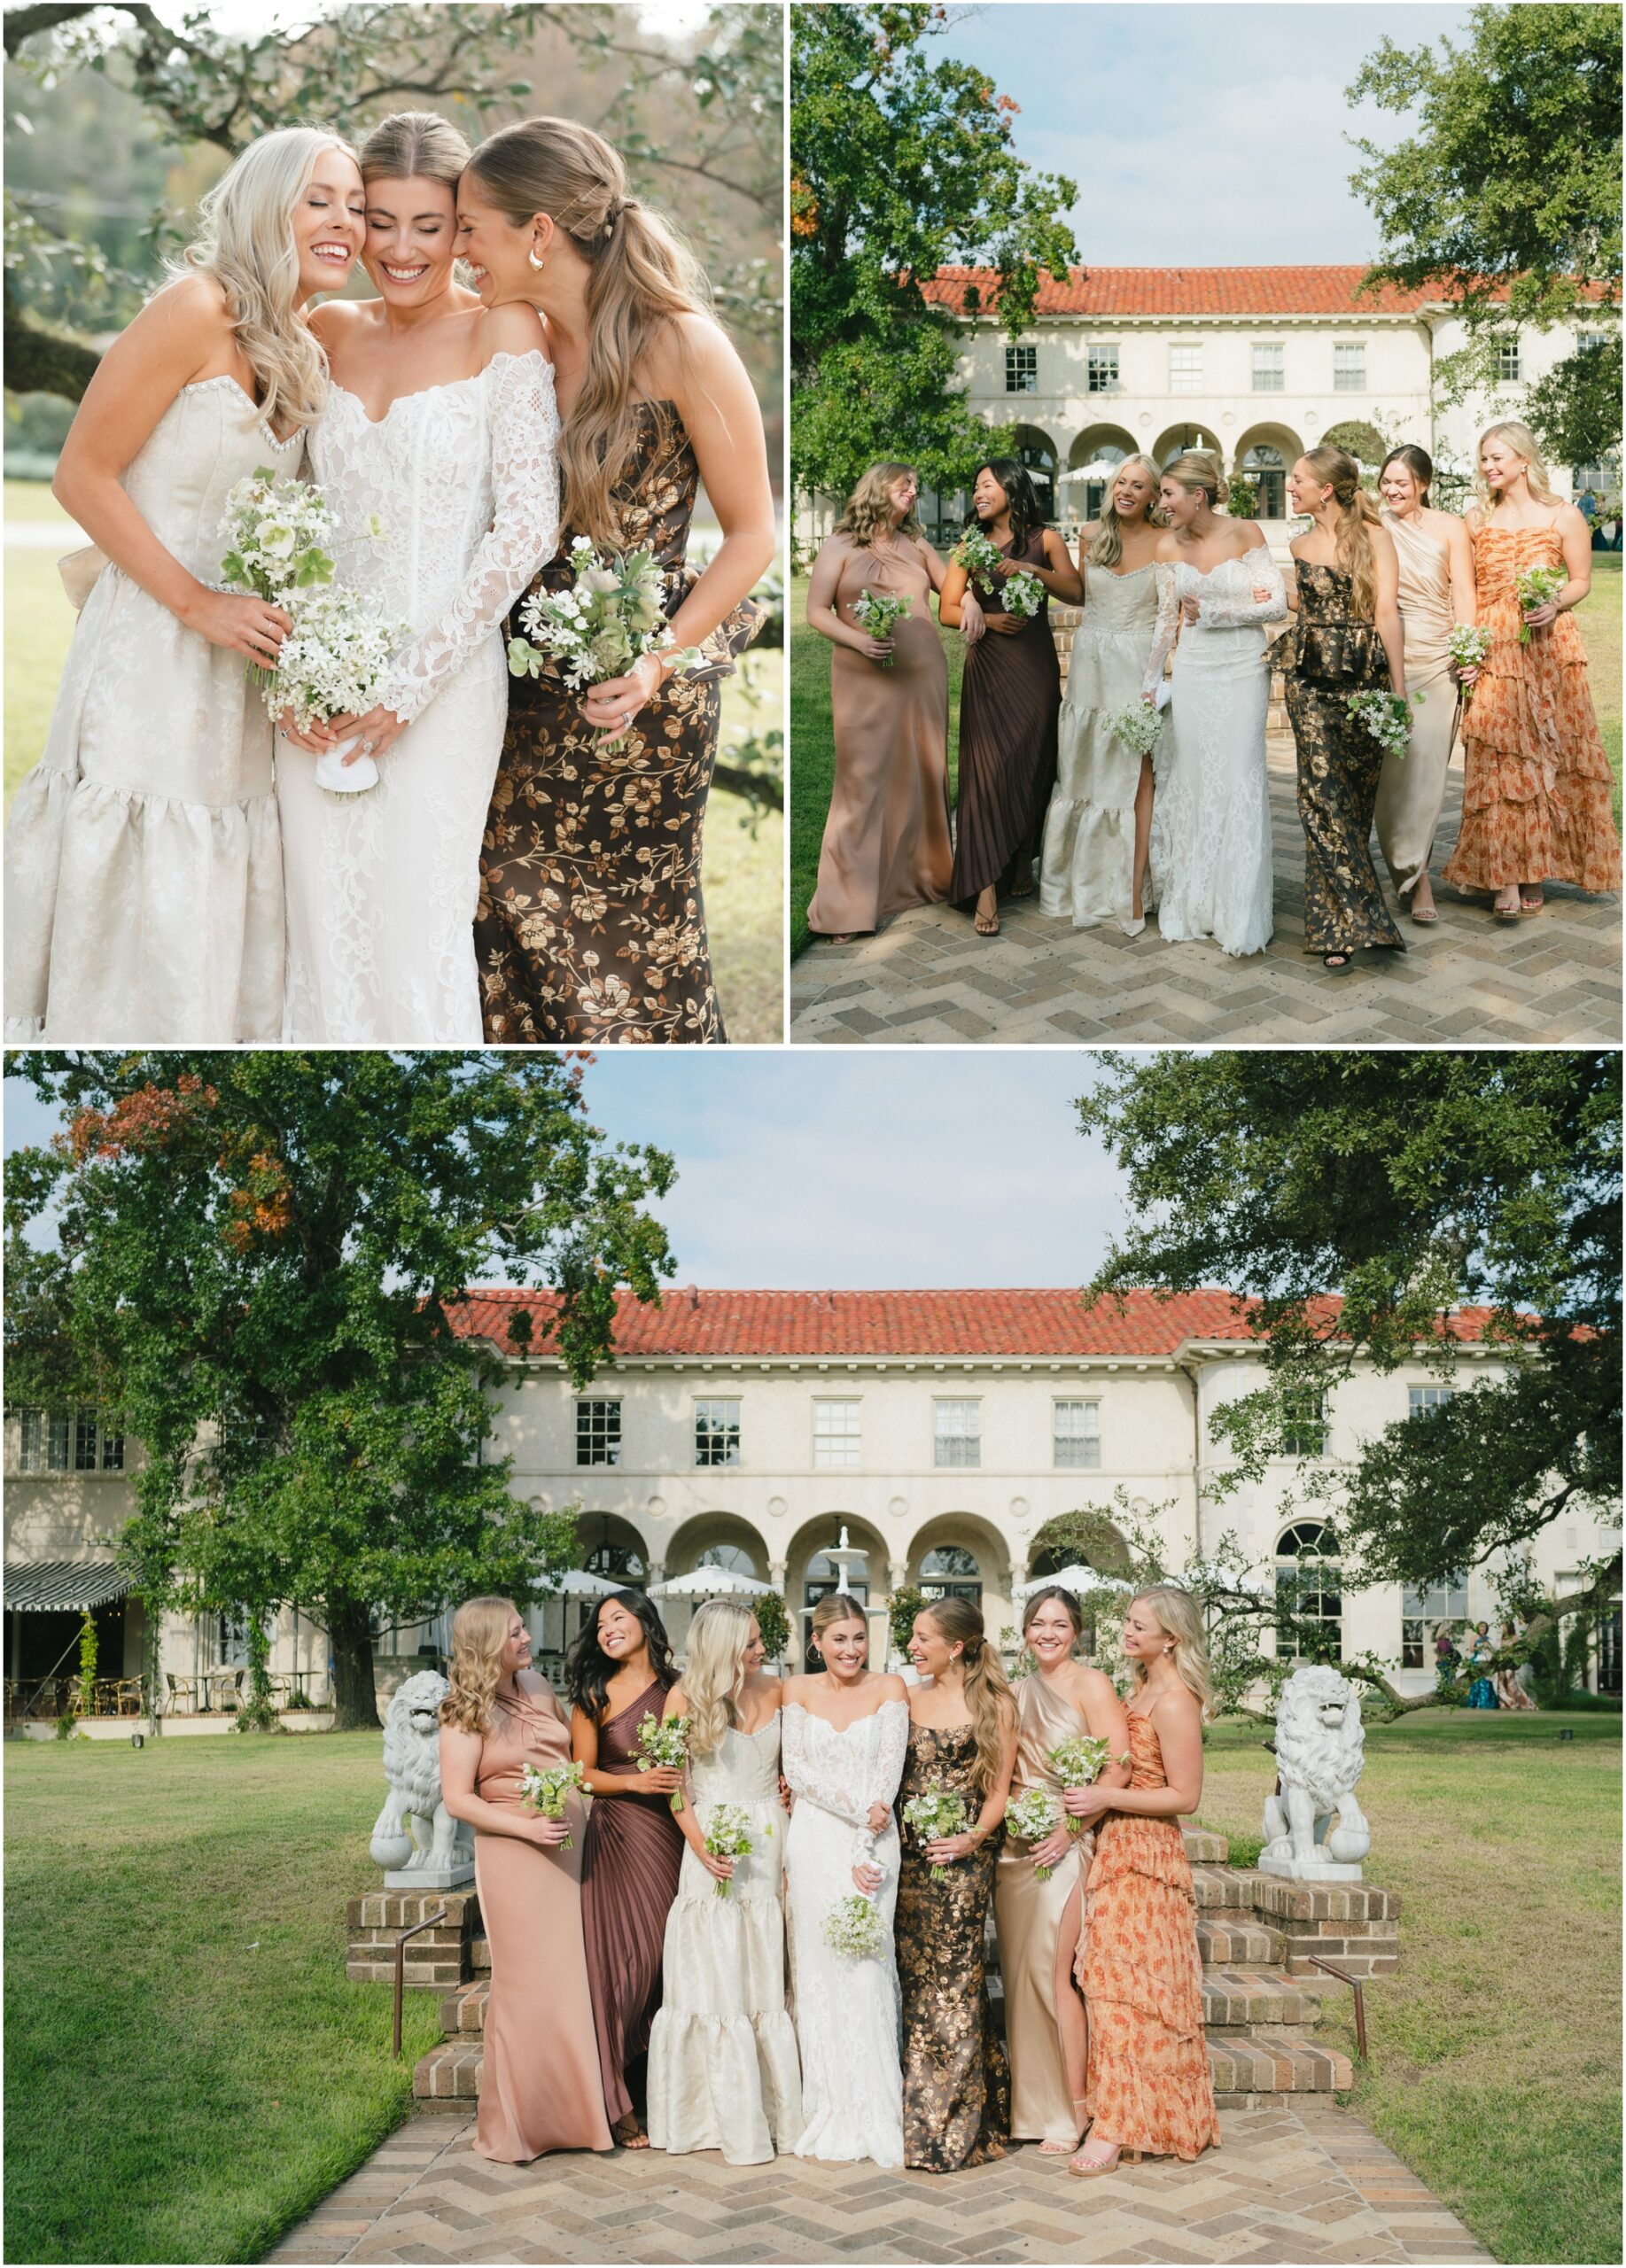 Bride walking with bridesmaids at a wedding at commodore perry estate in austin texas